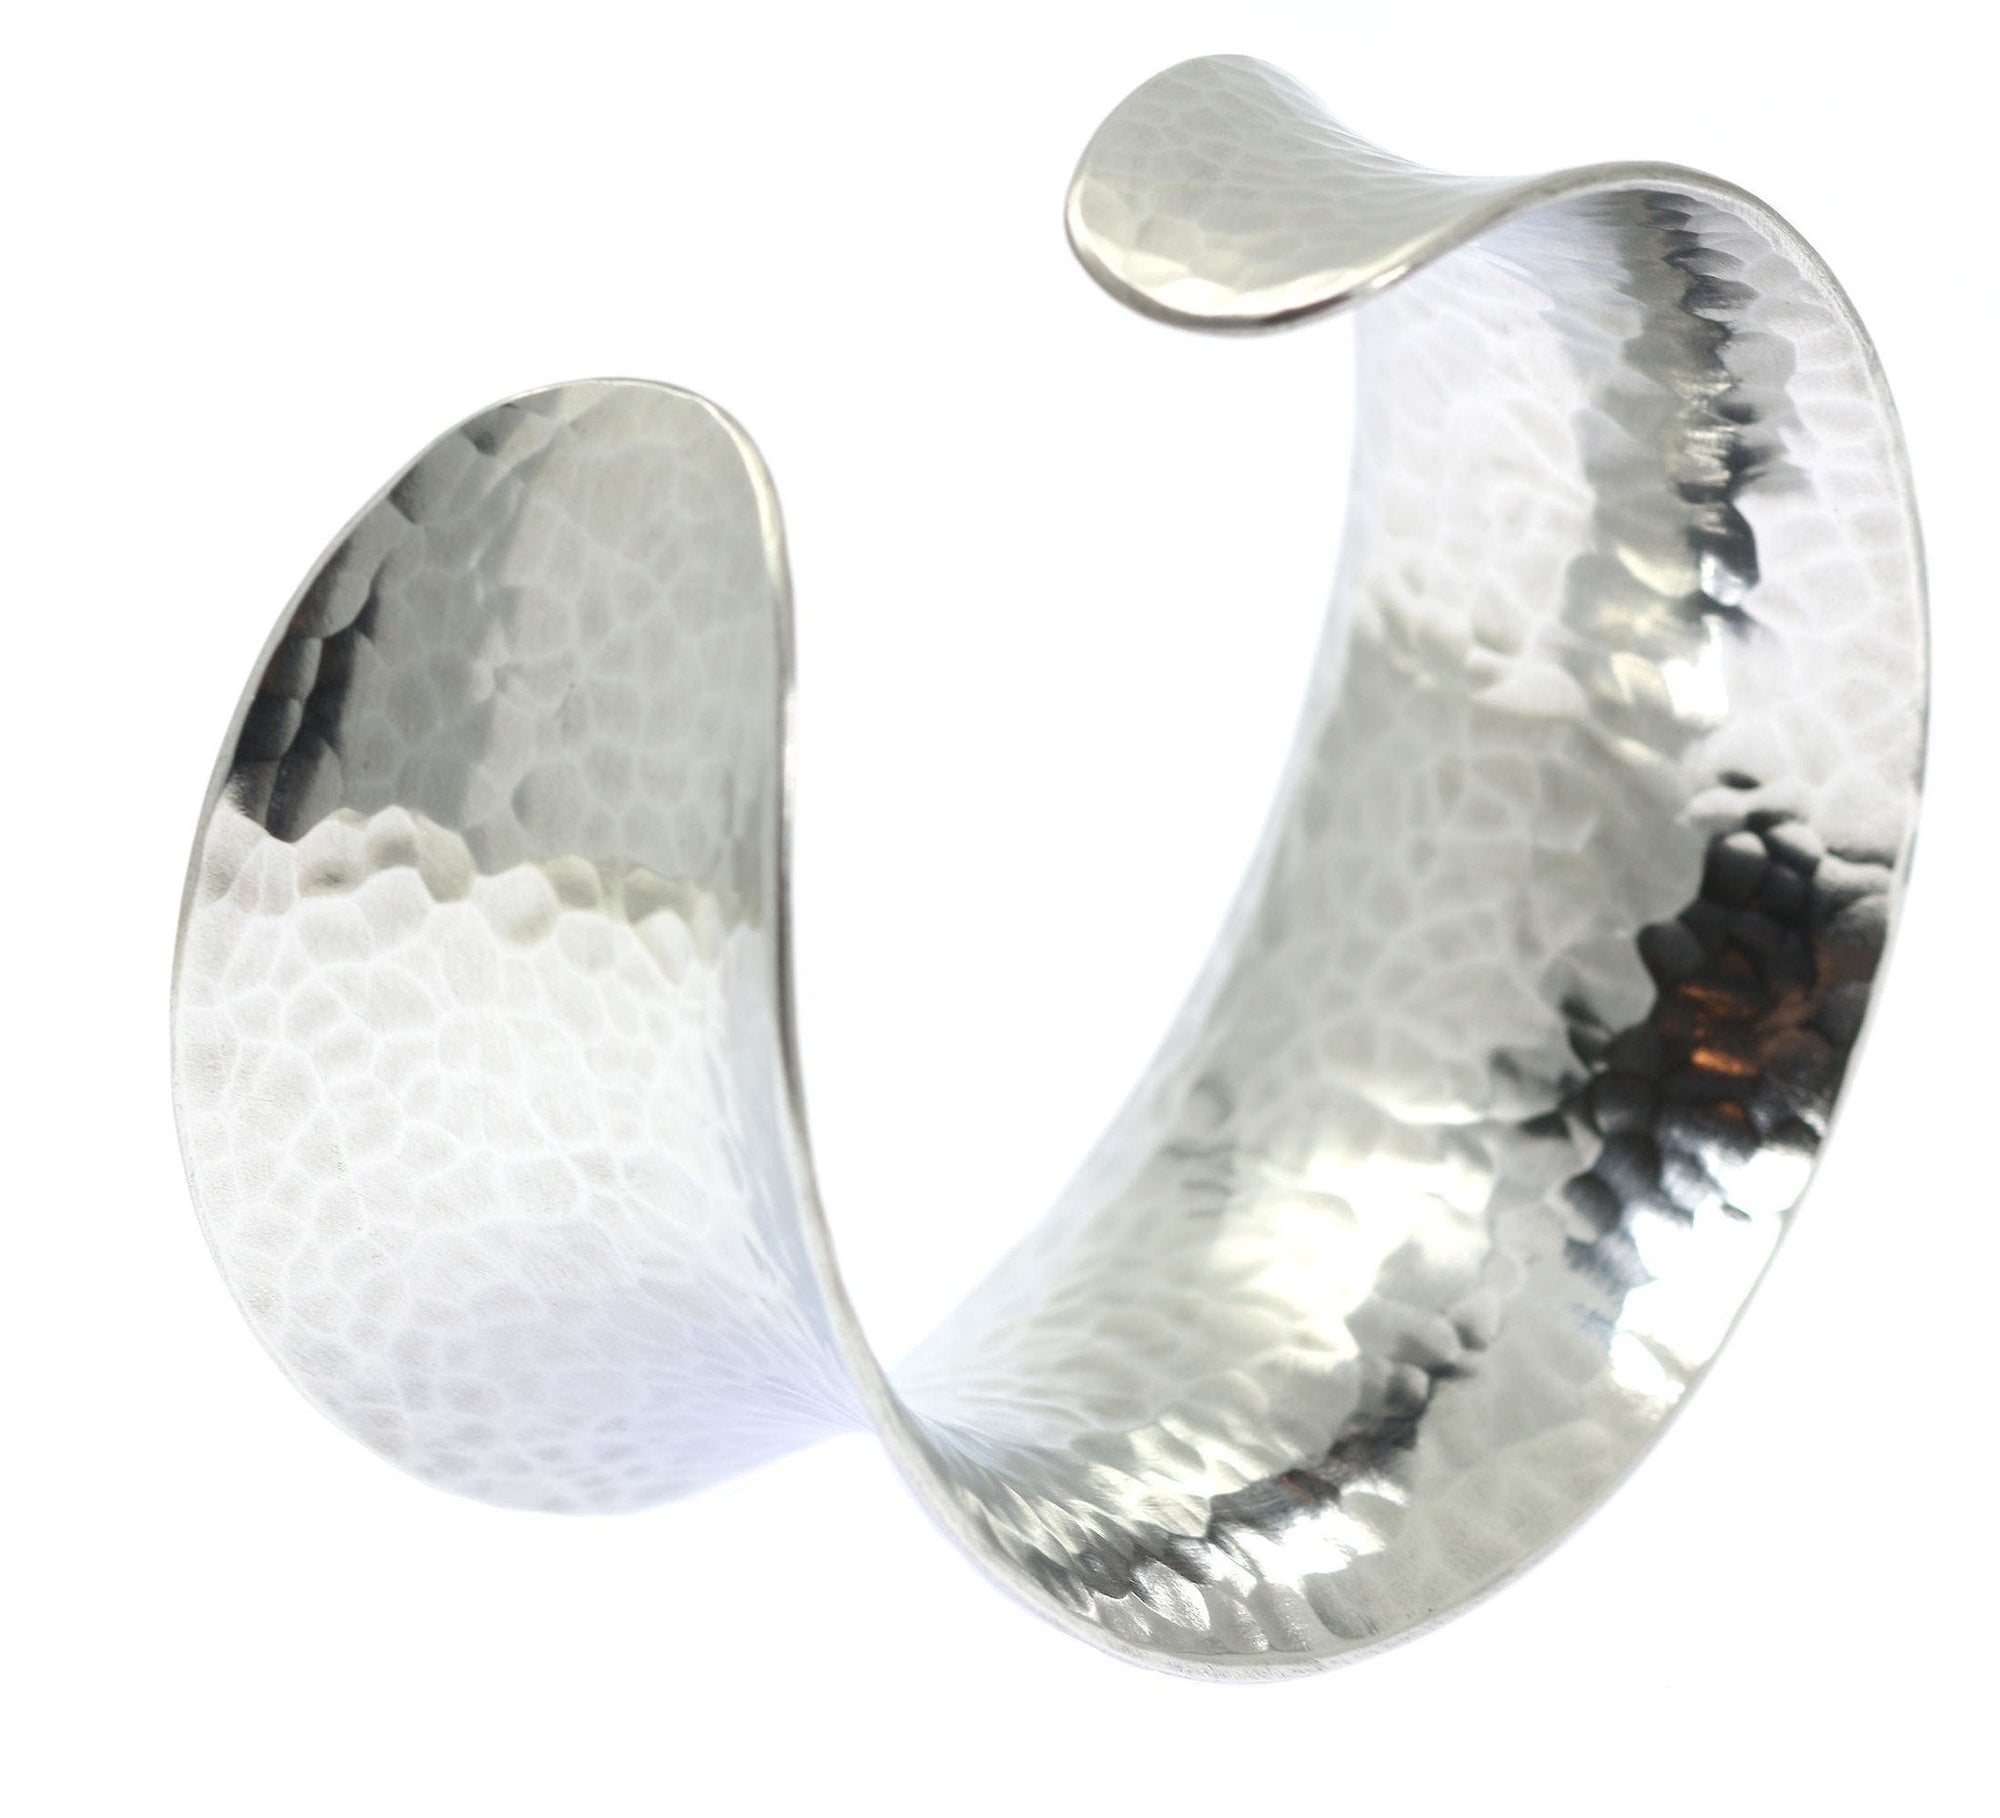 Detailed View of Hammered Aluminum Anticlastic Bangle